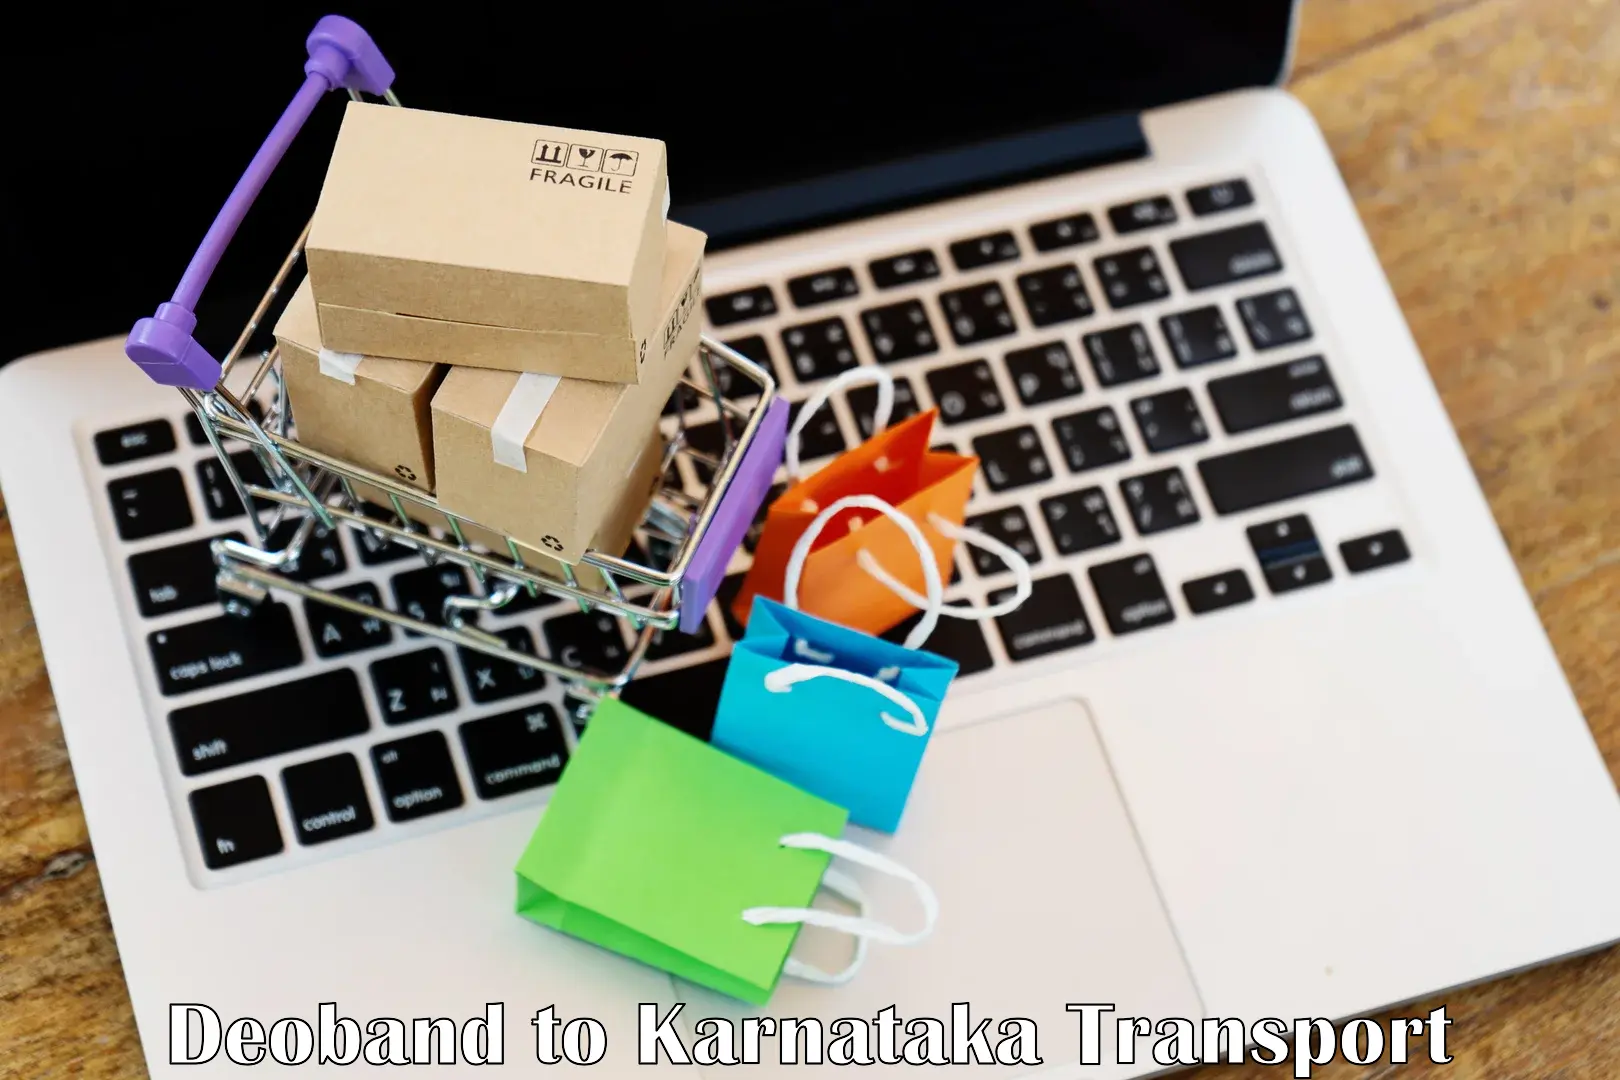 Online transport service Deoband to Yellare